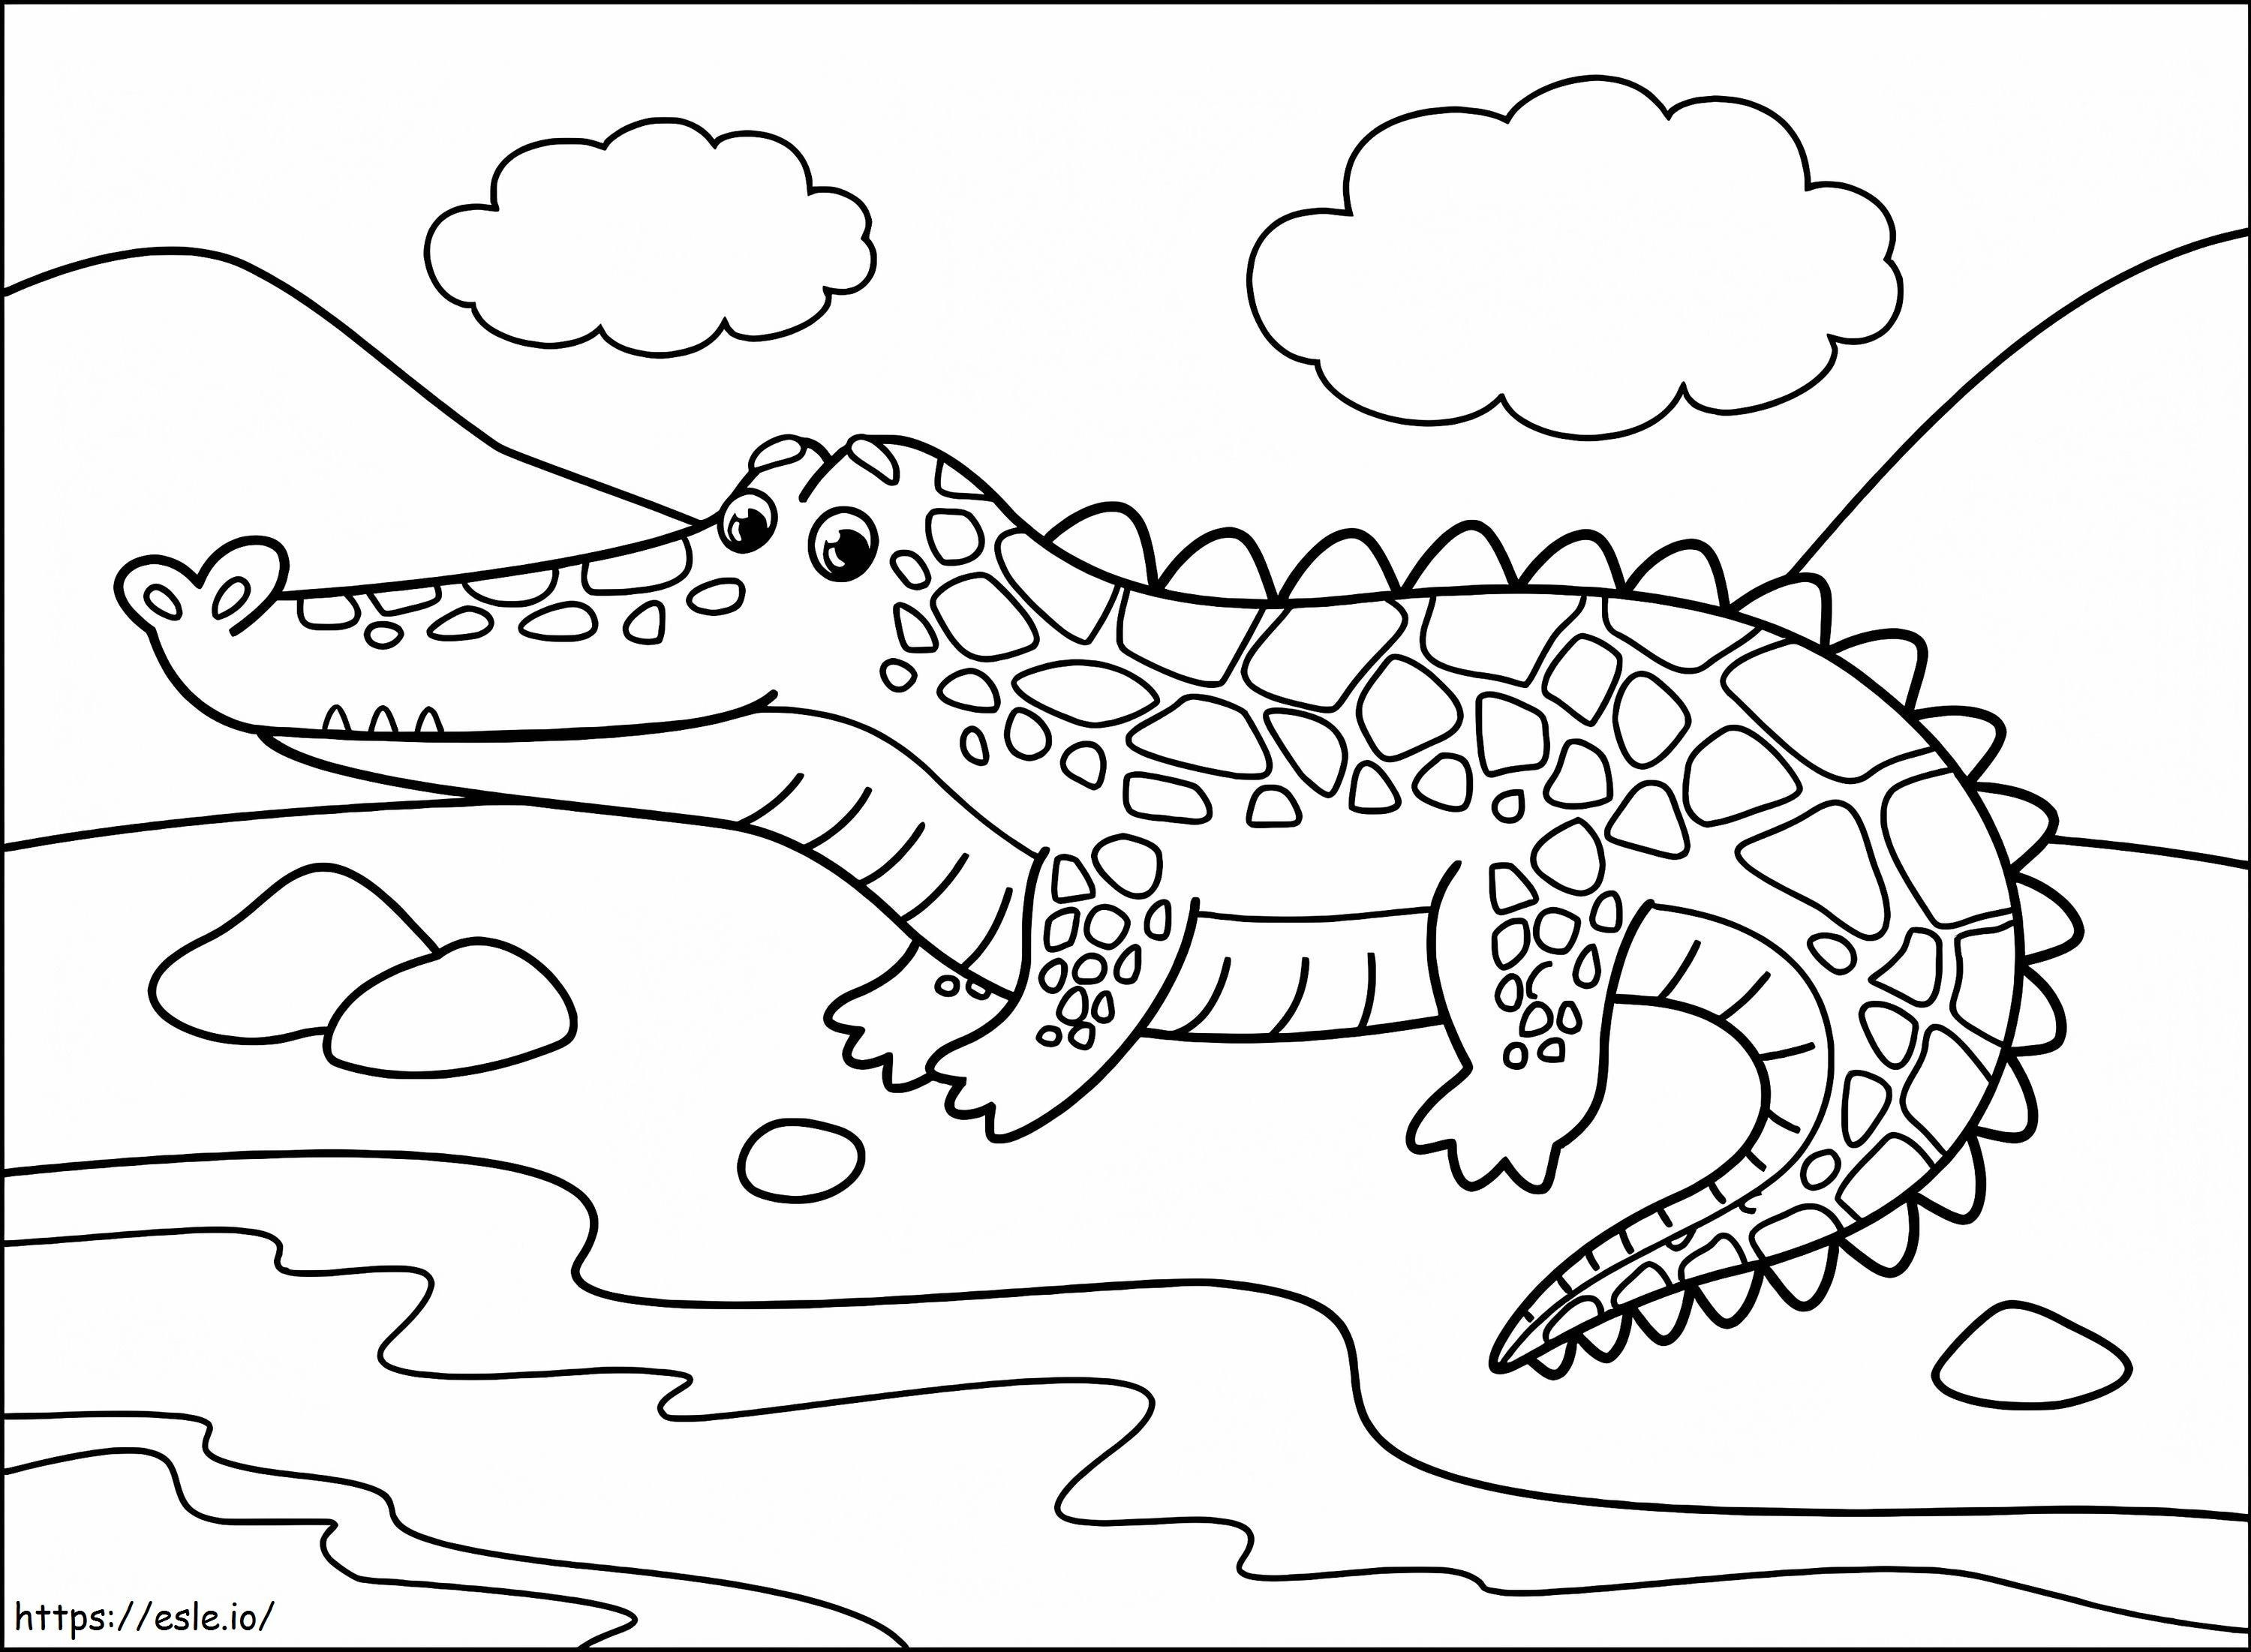 Friendly Alligator coloring page